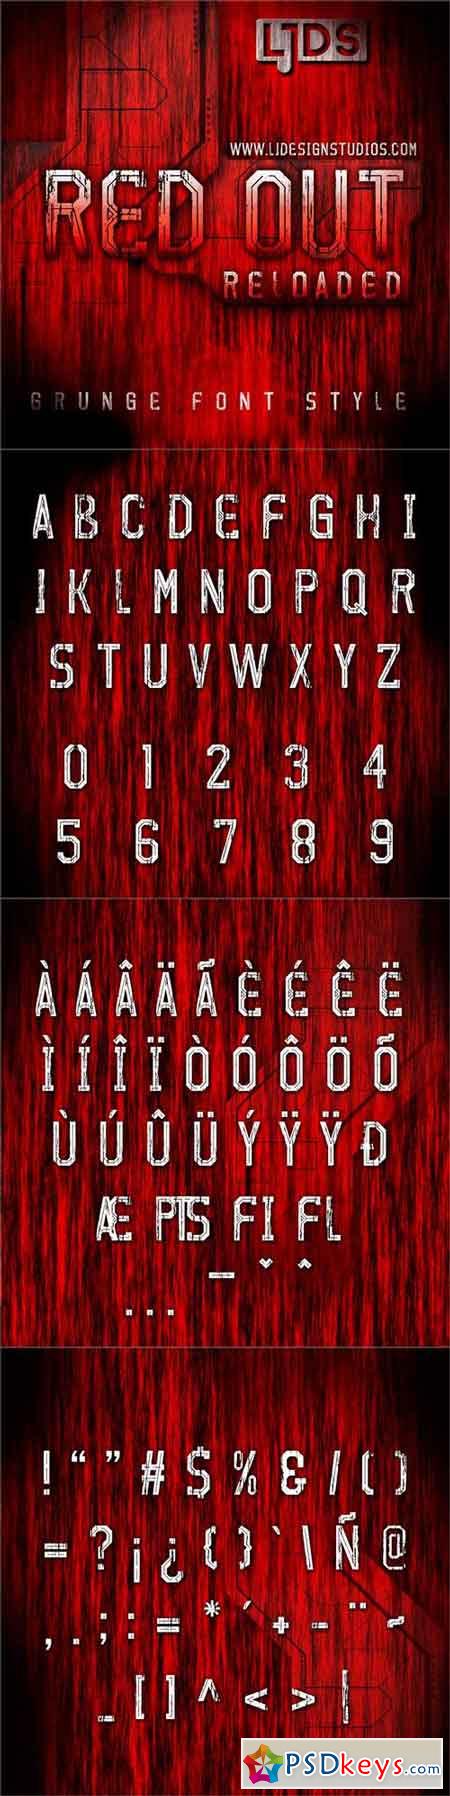 Red Out Reloaded font